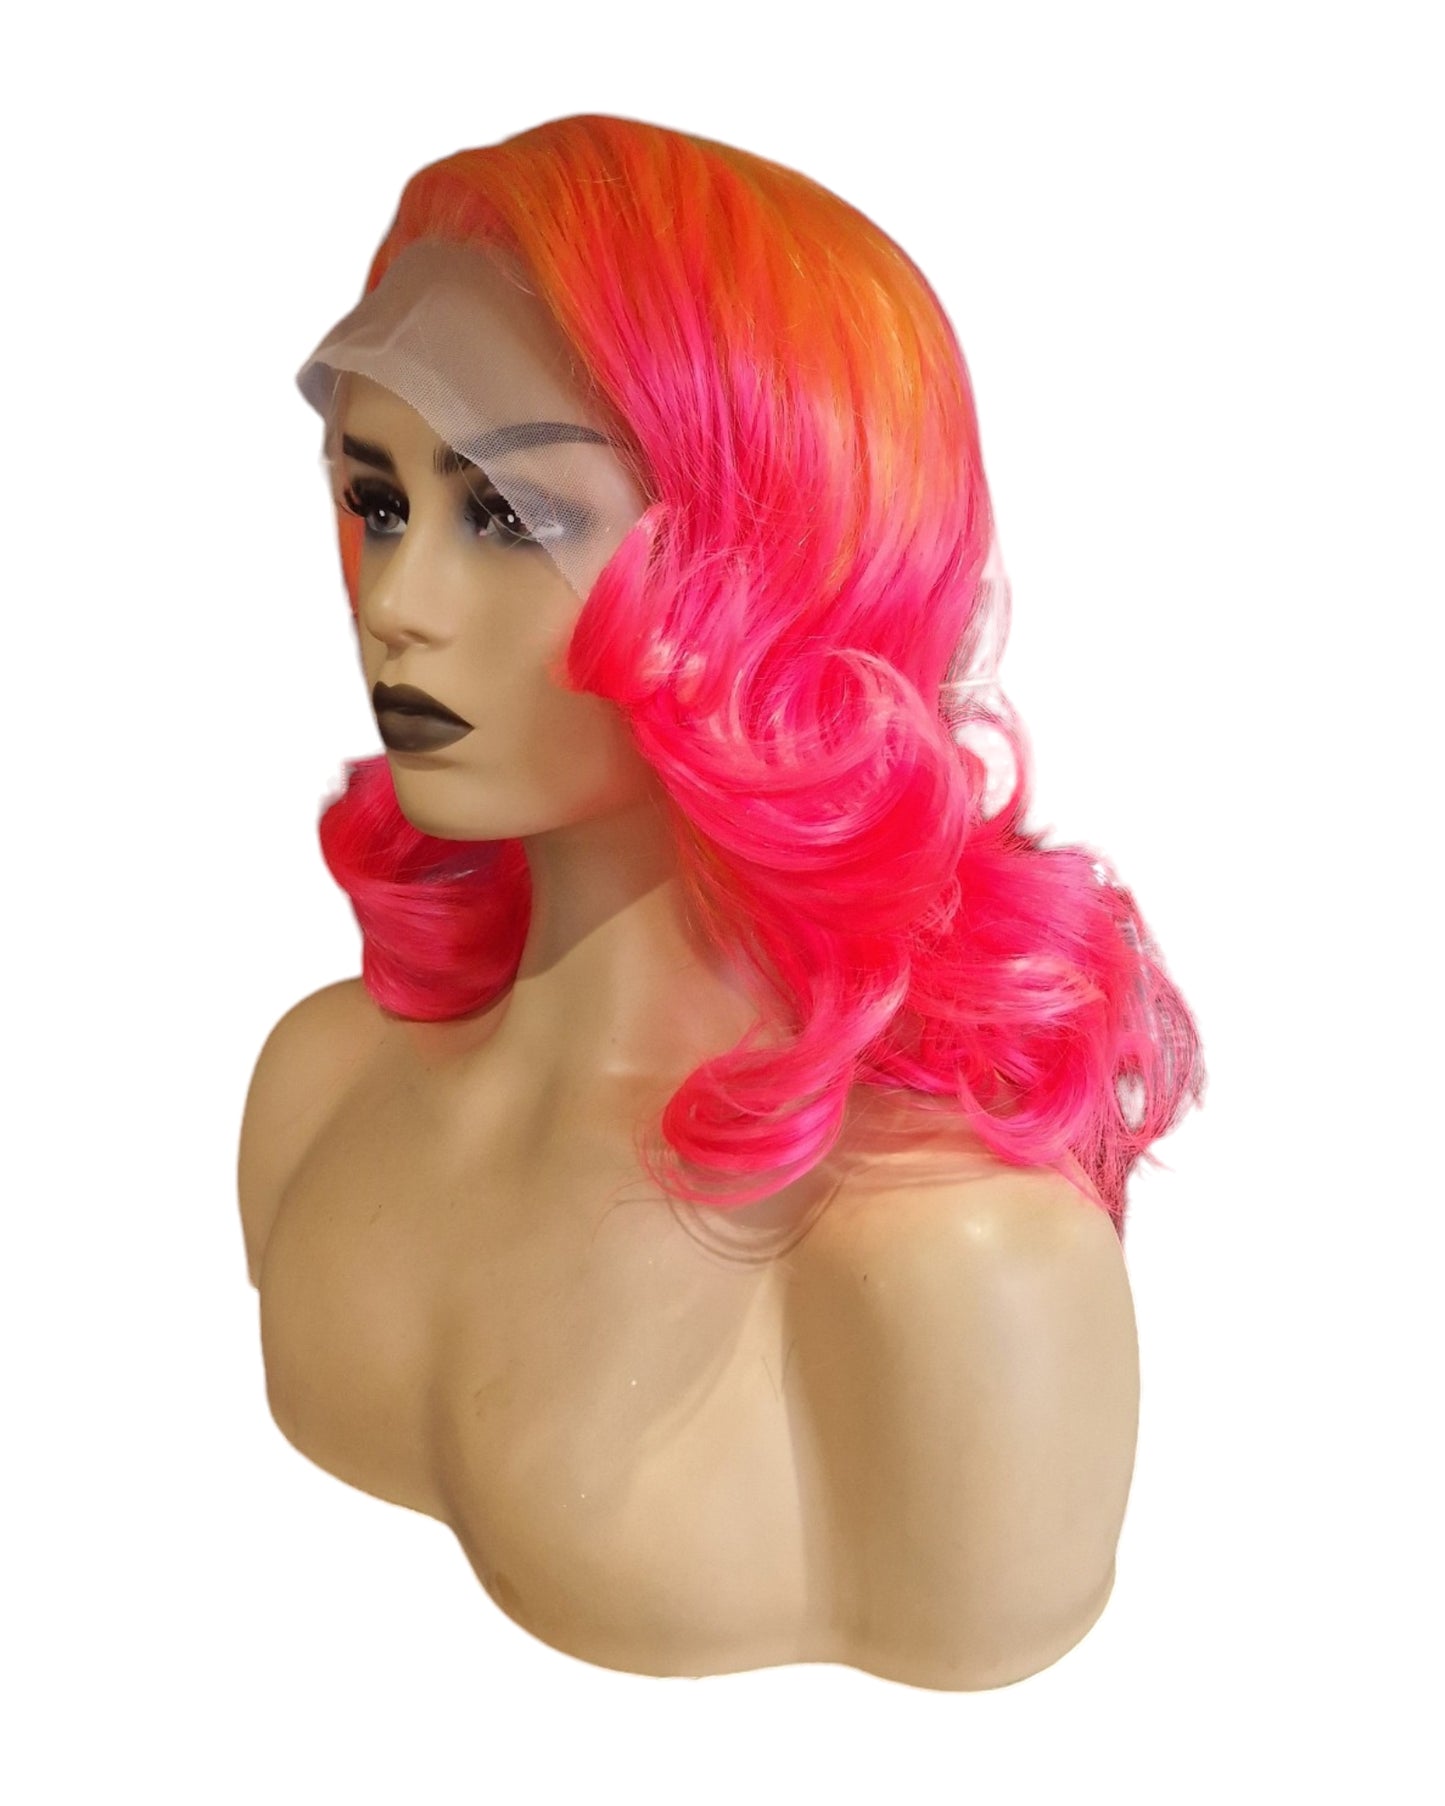 Neon Pink & Orange Marilyn Style Lace Front Wig. Vera